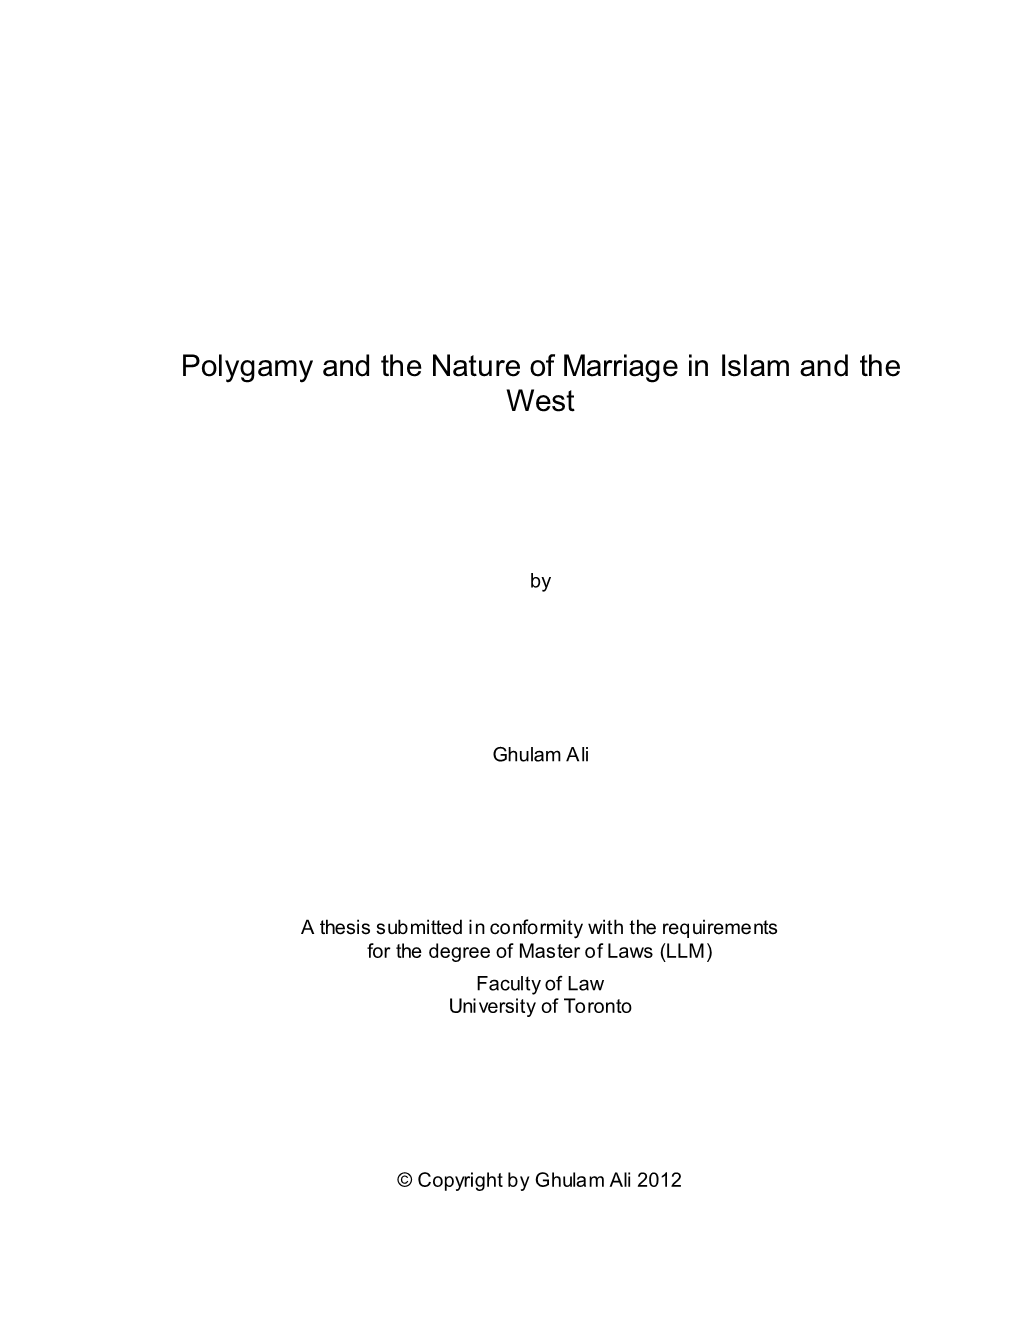 Polygamy and the Nature of Marriage in Islam and the West